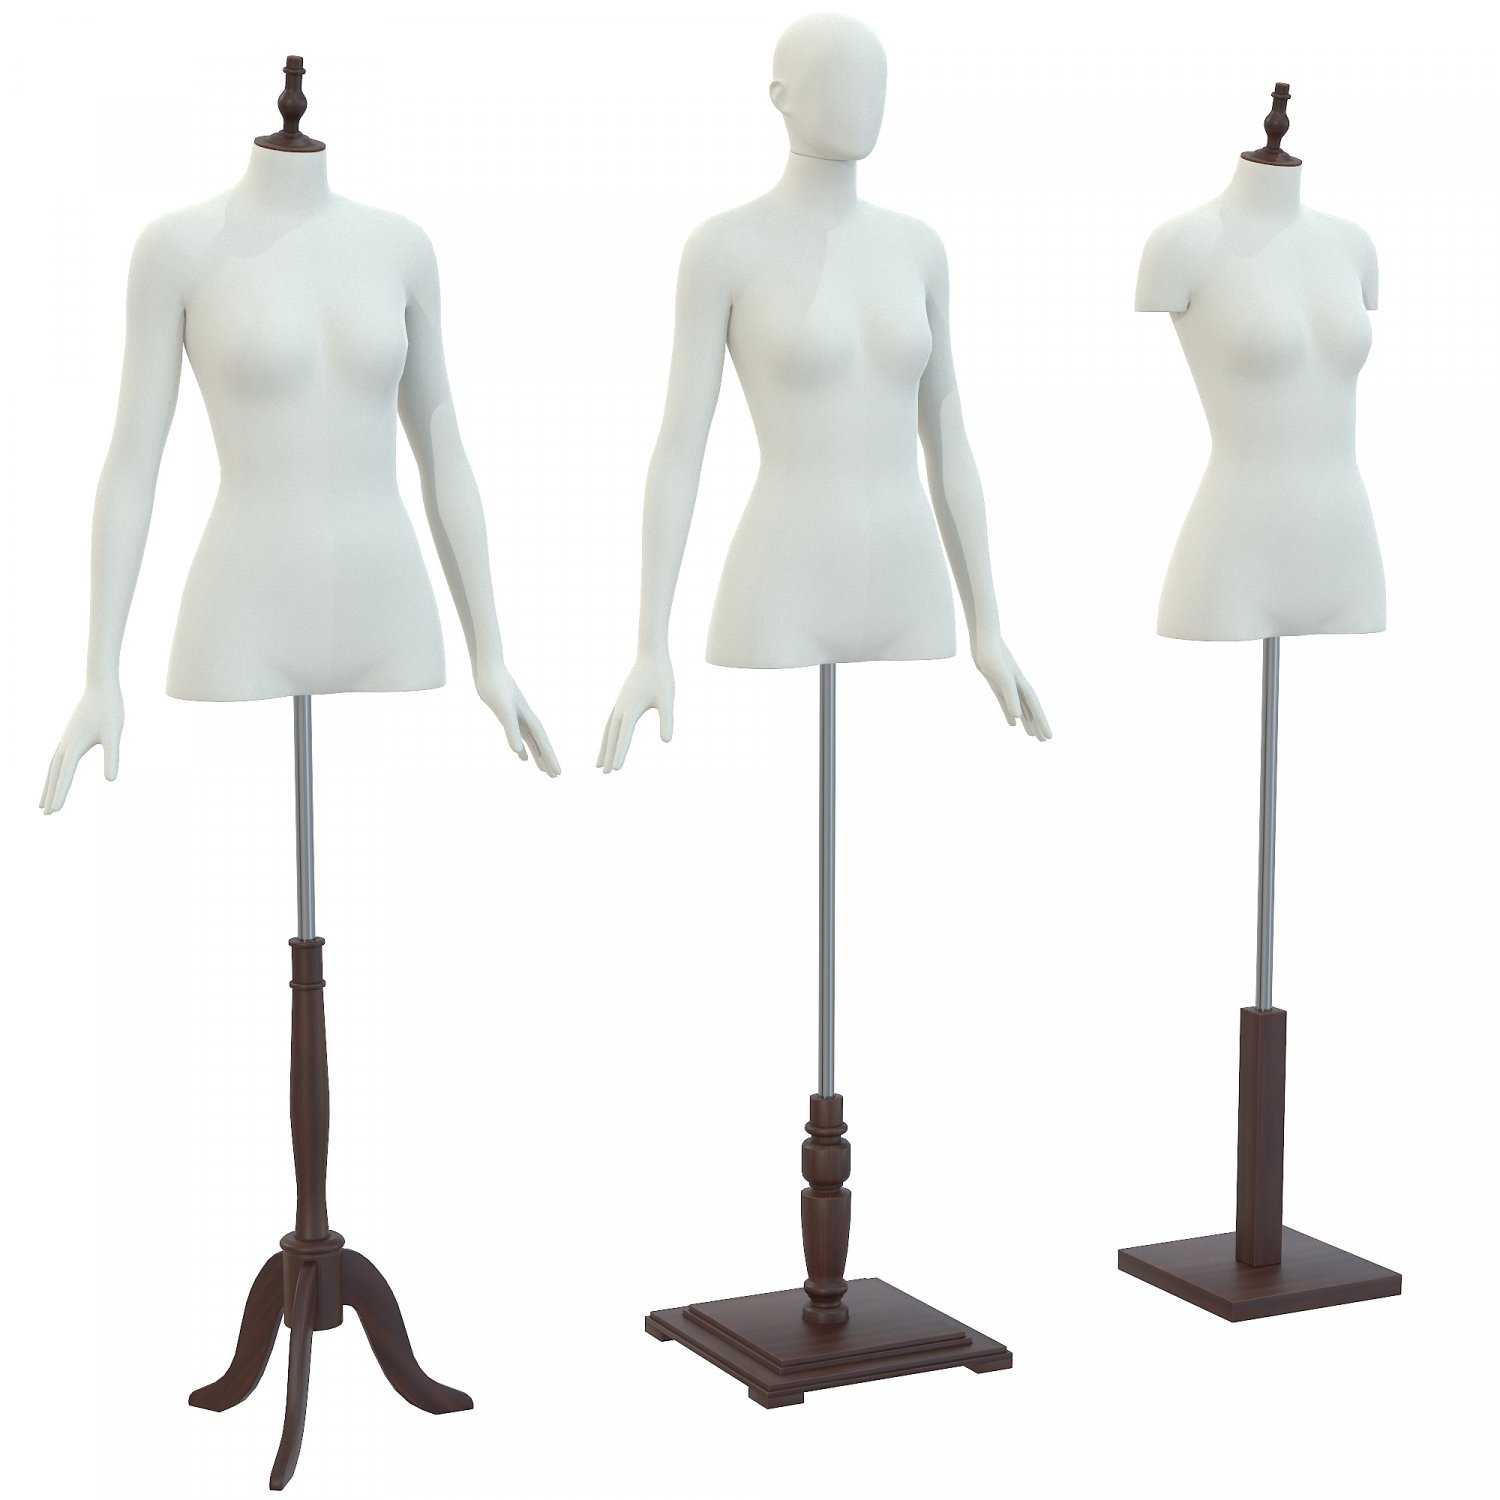 Dress mannequin with stand 3d model 3ds max files free download - modeling  27530 on CadNav